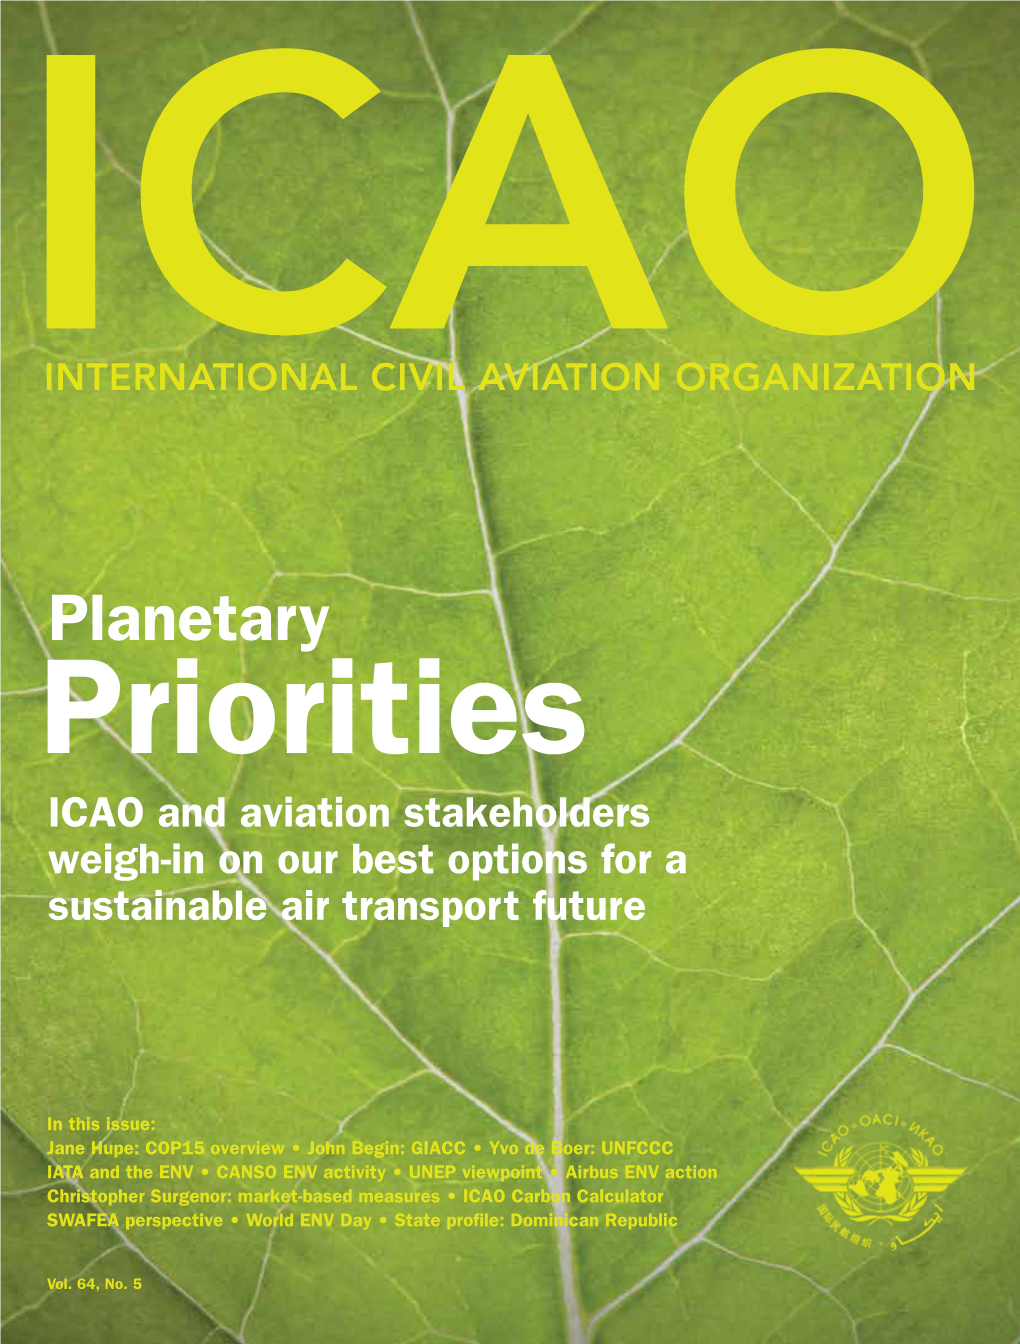 Planetary Priorities ICAO and Aviation Stakeholders Weigh-In on Our Best Options for a Sustainable Air Transport Future